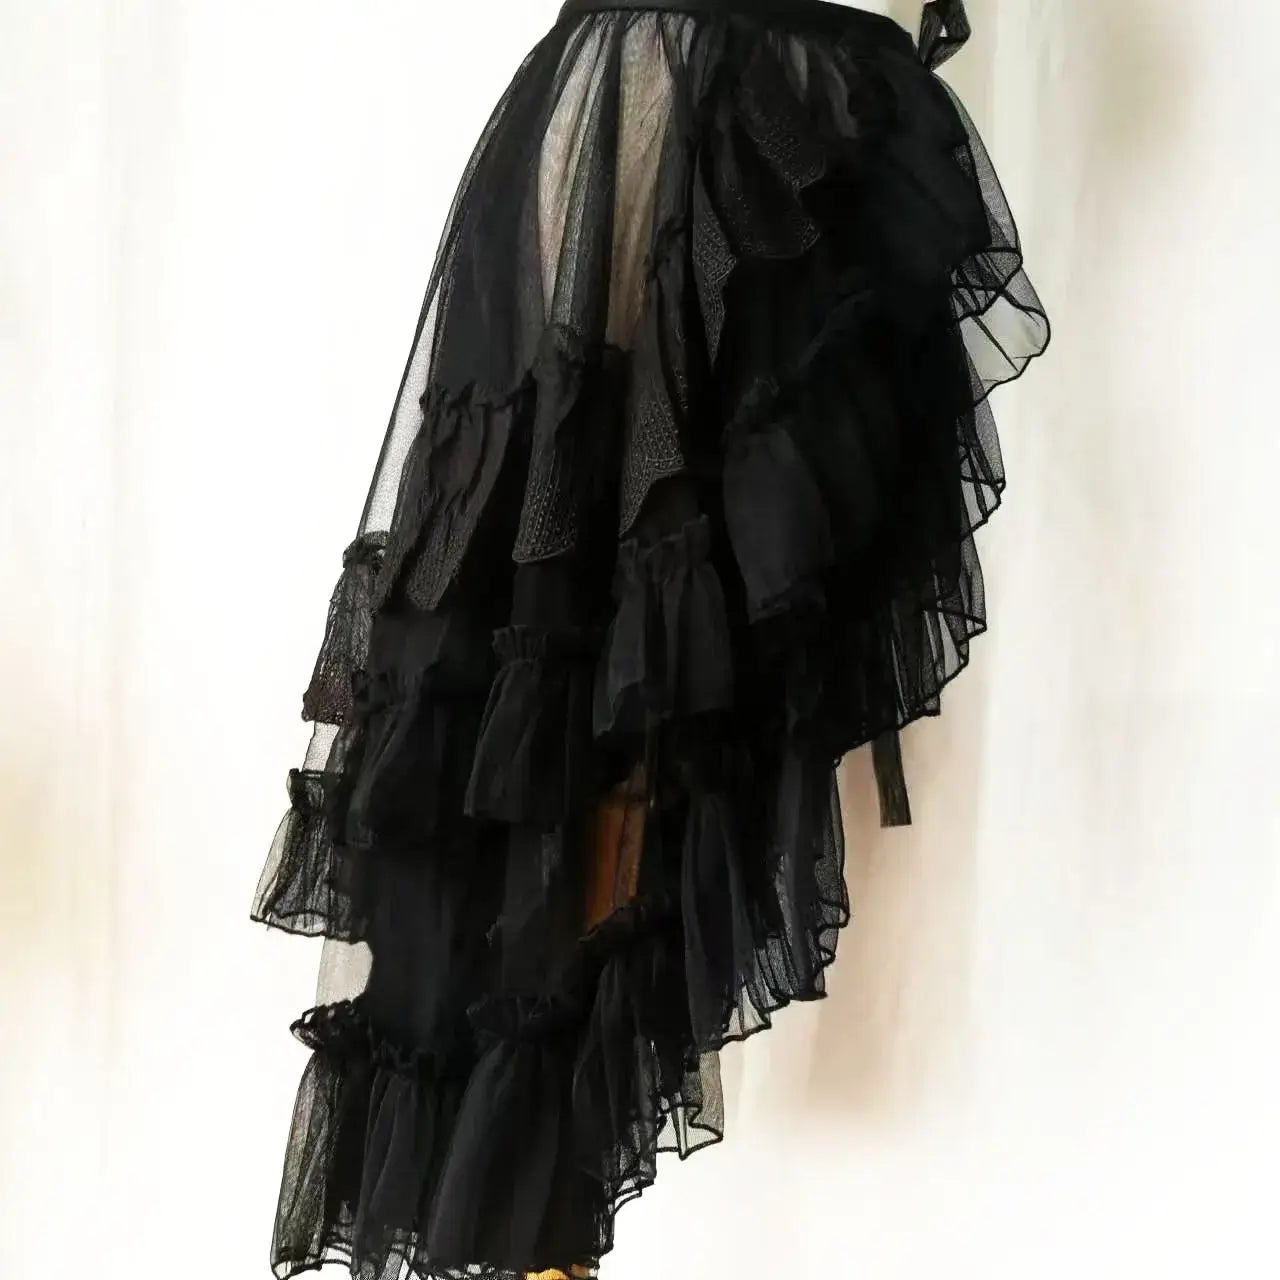 Double Layered Lolita Waist Sheer Cover Up